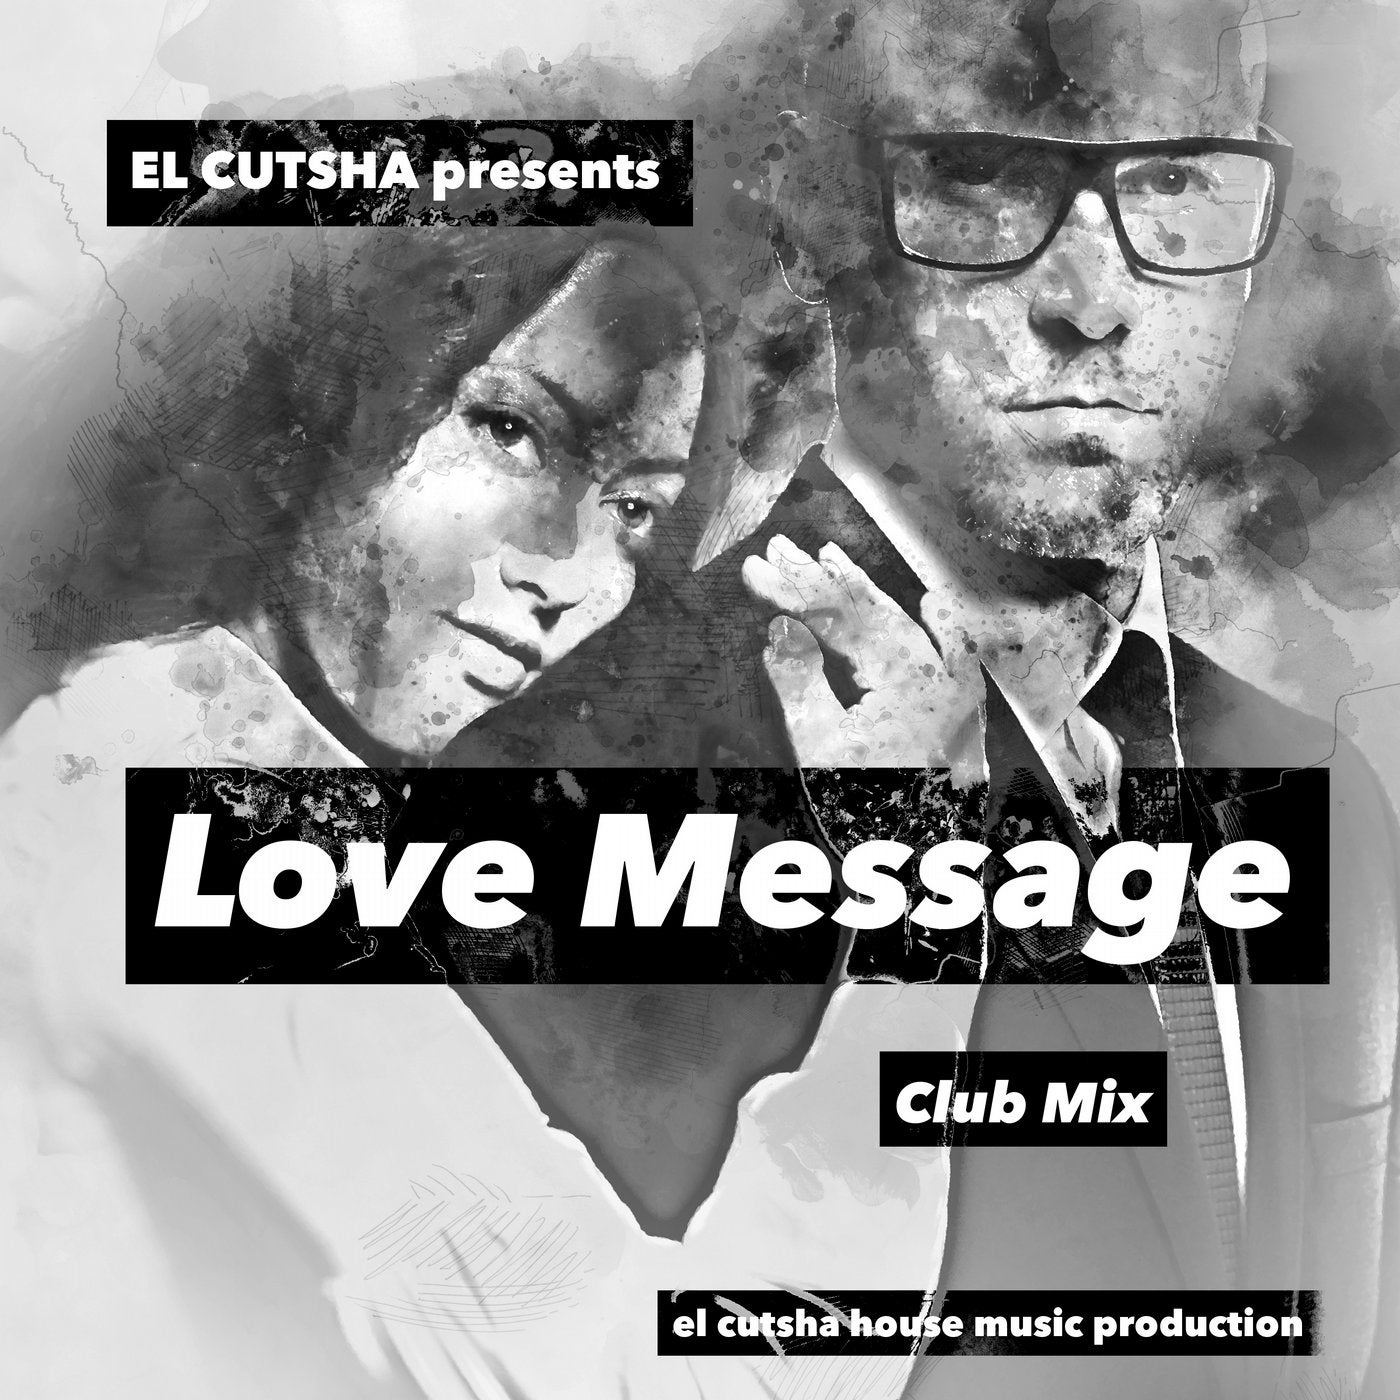 The message Club.